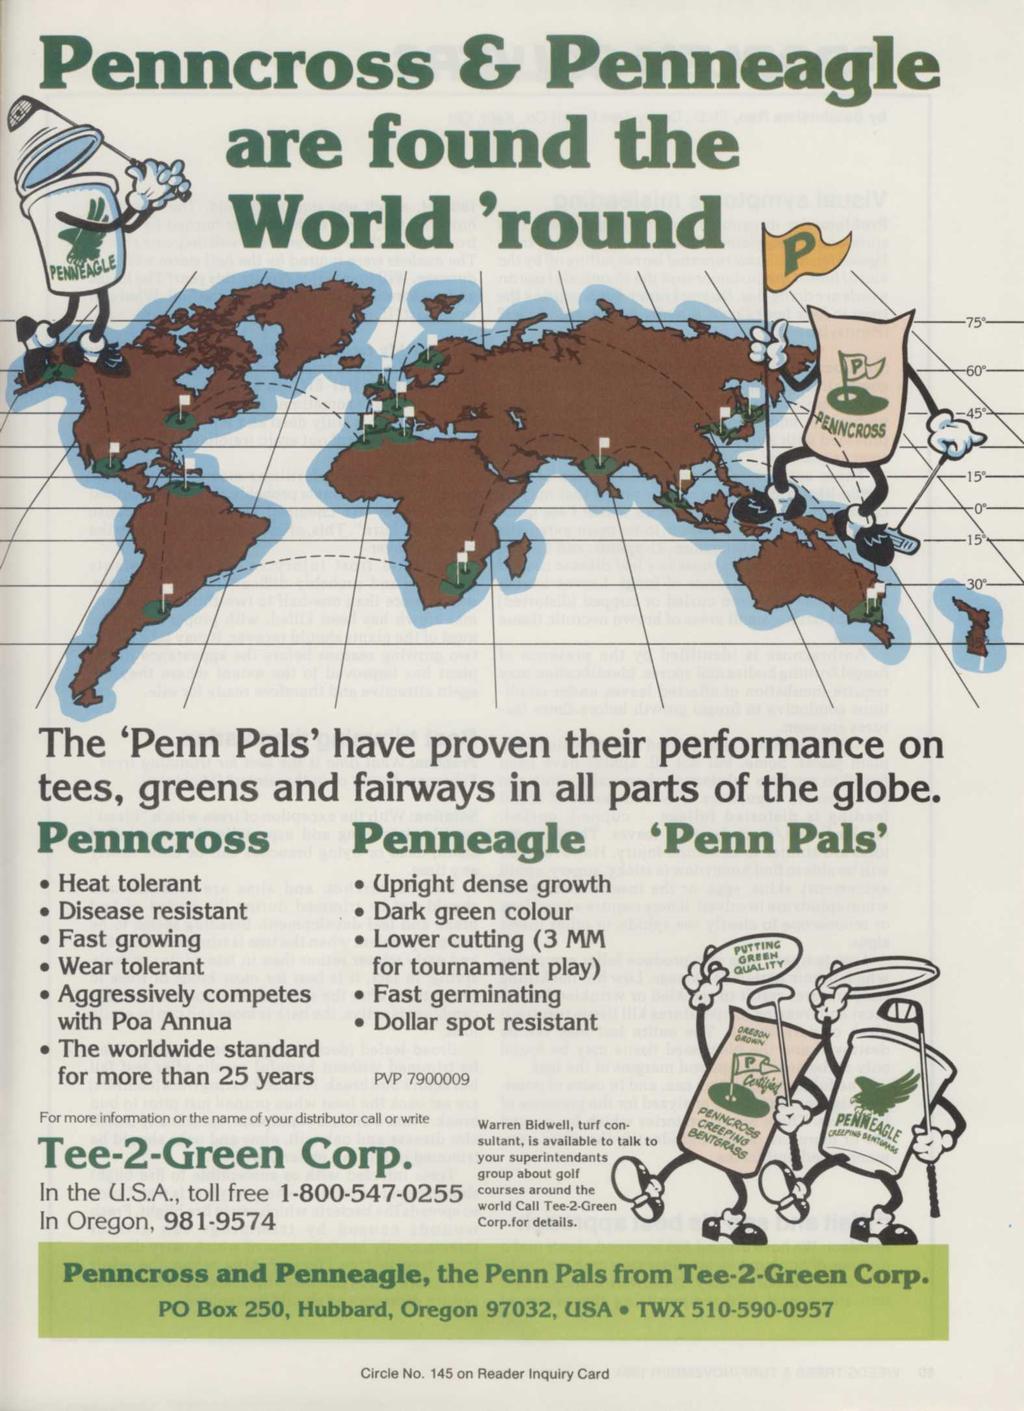 Penncross & Penneagle are found the World 'round The 4 Penn Pals' have proven their performance on tees, greens and fairways in all parts of the globe.